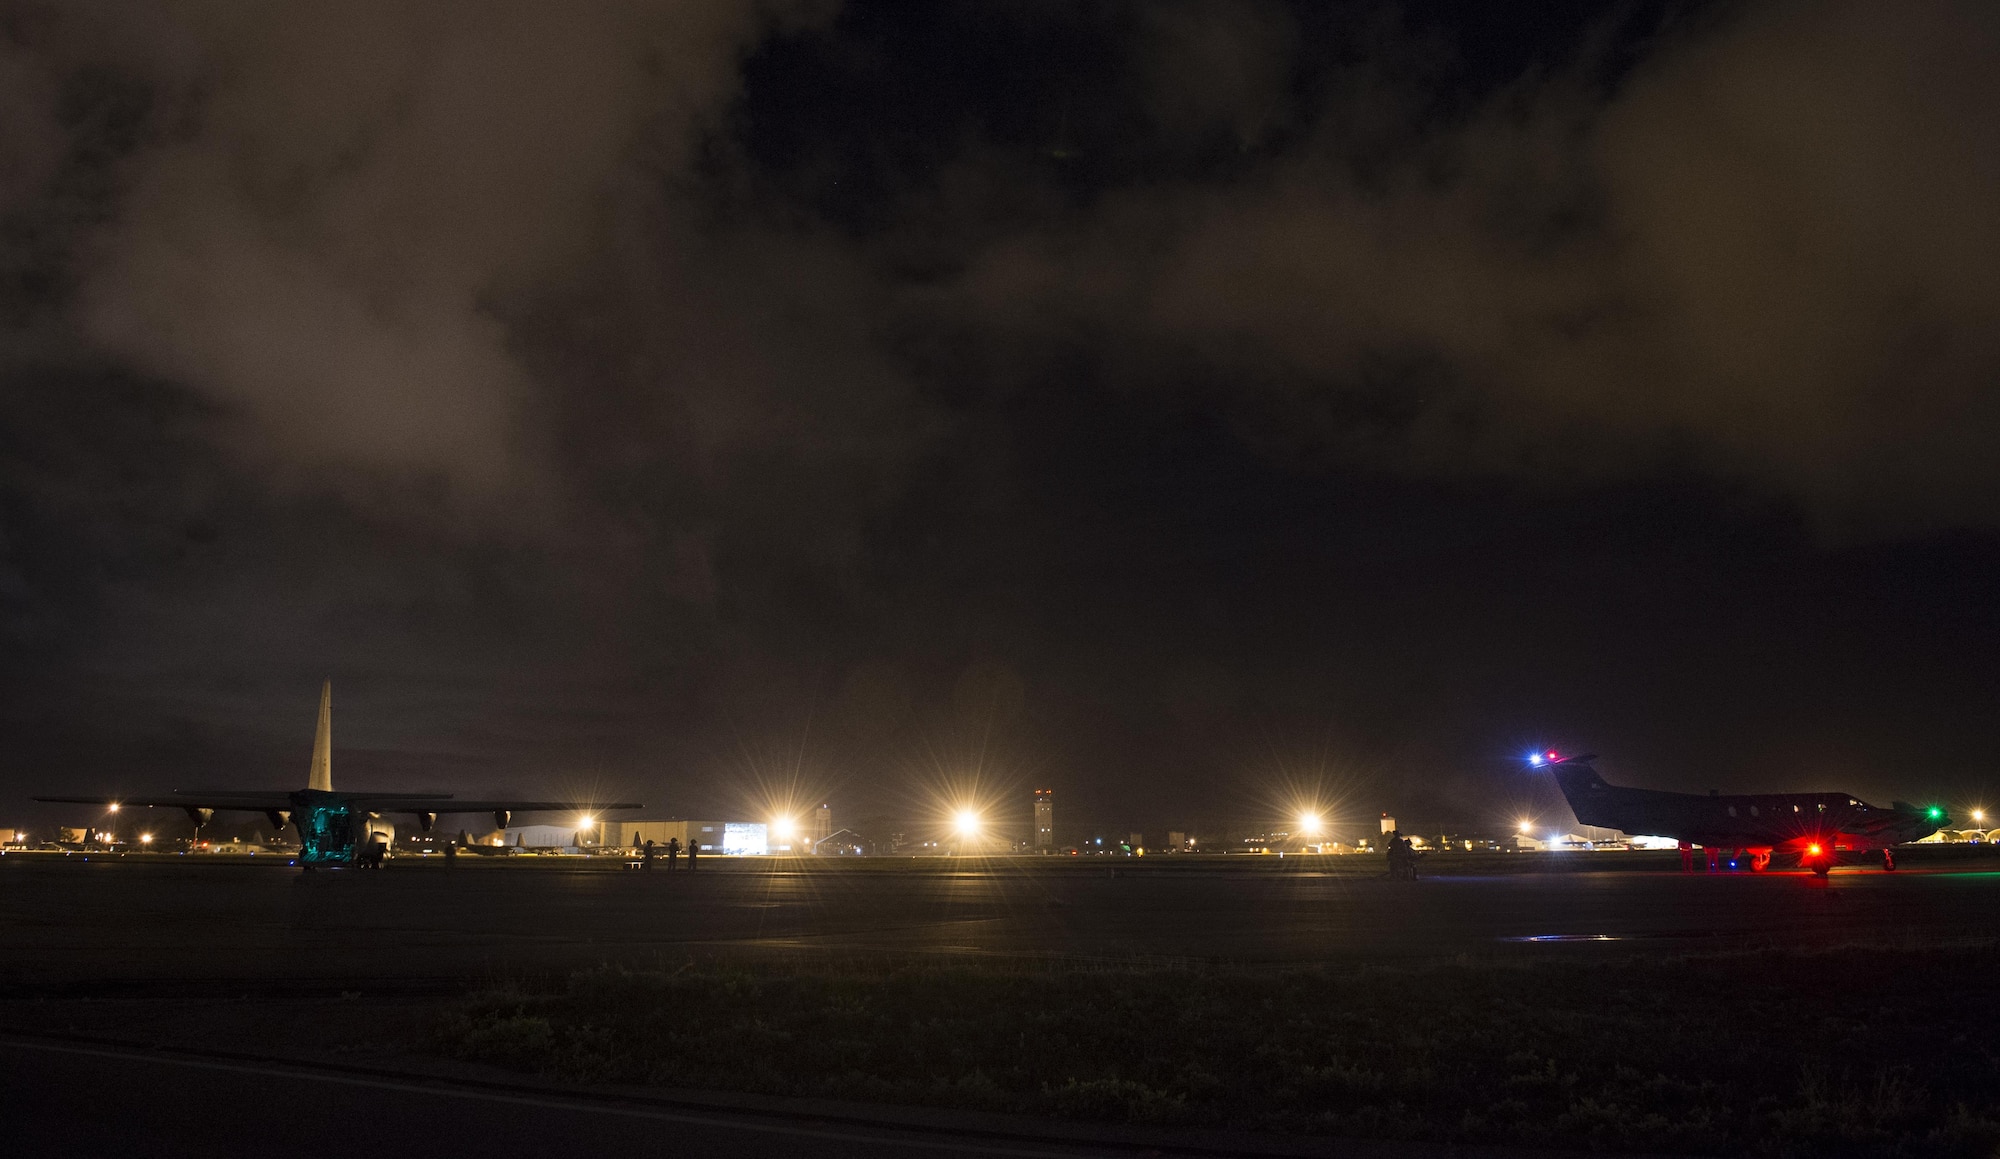 Air Commandos with the 1st Special Operations Logistic Readiness Squadron conduct a forward area refueling point operation at Hurlburt Field, Fla., June 13, 2017. During the operation, a Pilatus PC-12 assigned to the 319th Special Operations Squadron received fuel from an EC-130J Commando Solo assigned to the 193rd Special Operations Wing, Middletown, Pa. The FARP program is a United States Special Operations Command initiative that performs nighttime refueling operations in deployed locations where fueling stations are not accessible or when air-to-air refueling is not possible. Forward area refueling points enable global reach and mission accomplishment. (U.S. Air Force photo by Airman 1st Class Joseph Pick)